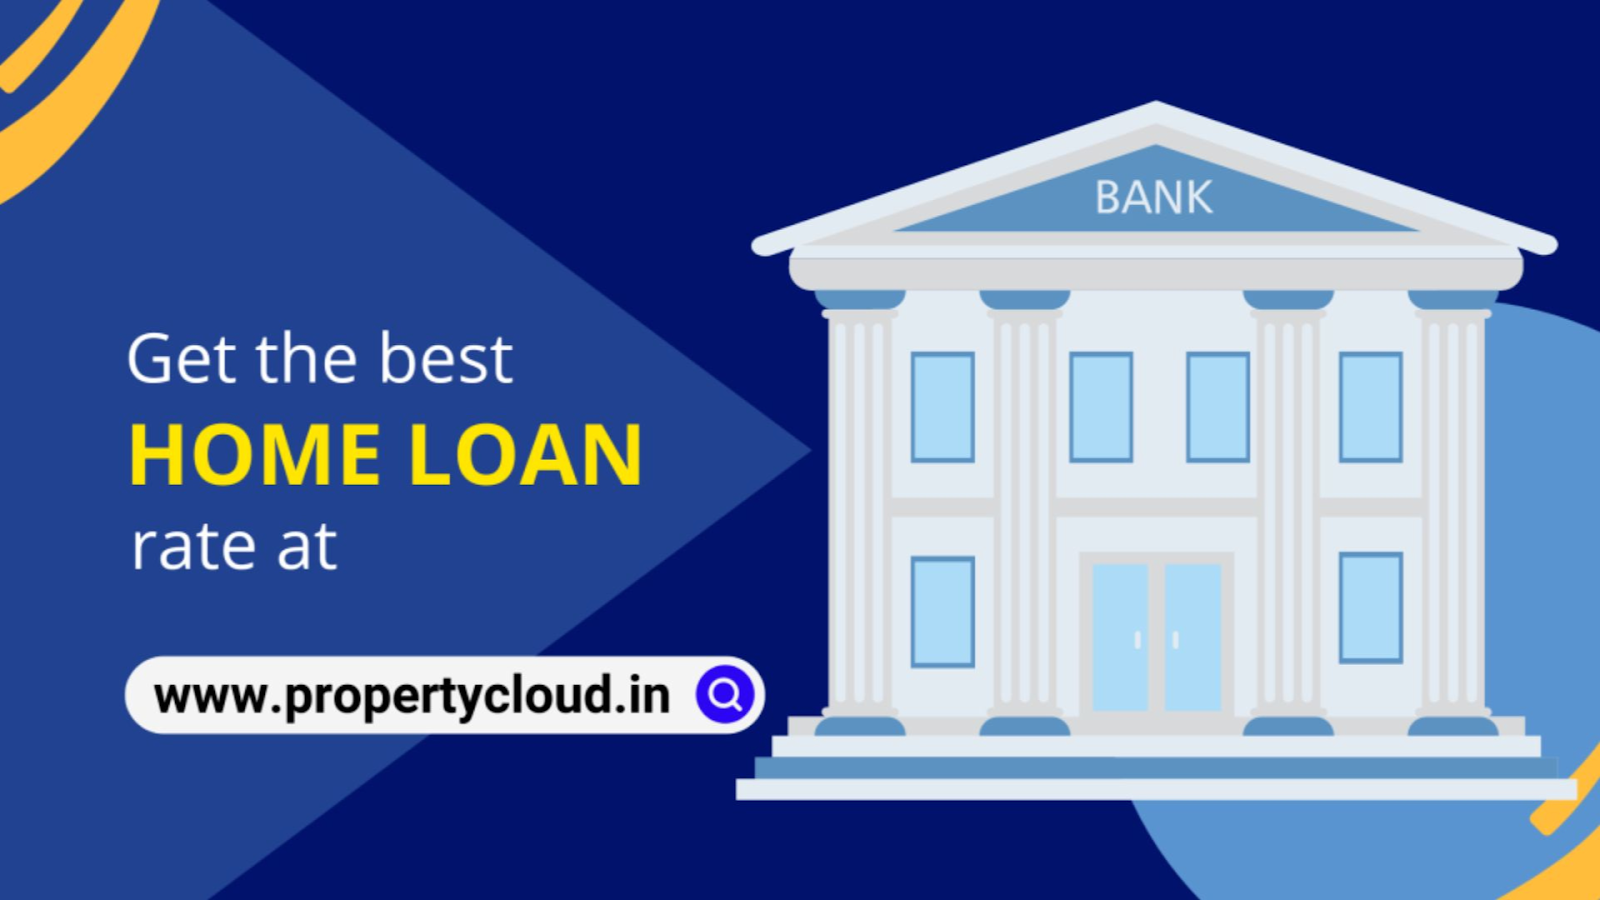 To receive the best guidance on house loans at the lowest interest rate, get in contact with PropertyCloud.